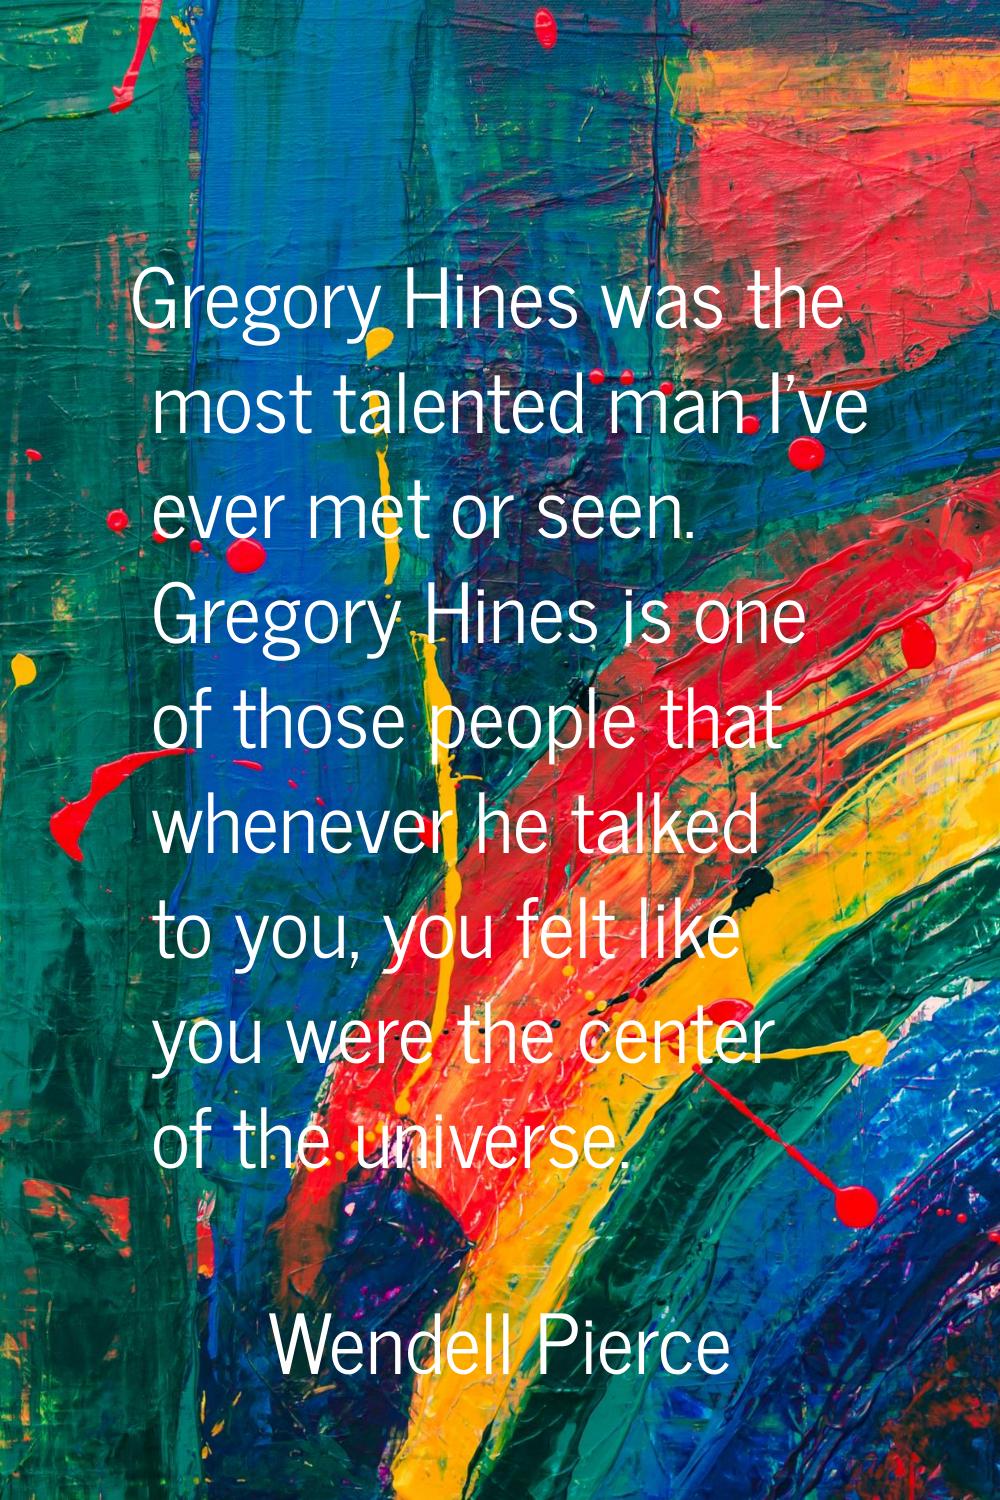 Gregory Hines was the most talented man I've ever met or seen. Gregory Hines is one of those people